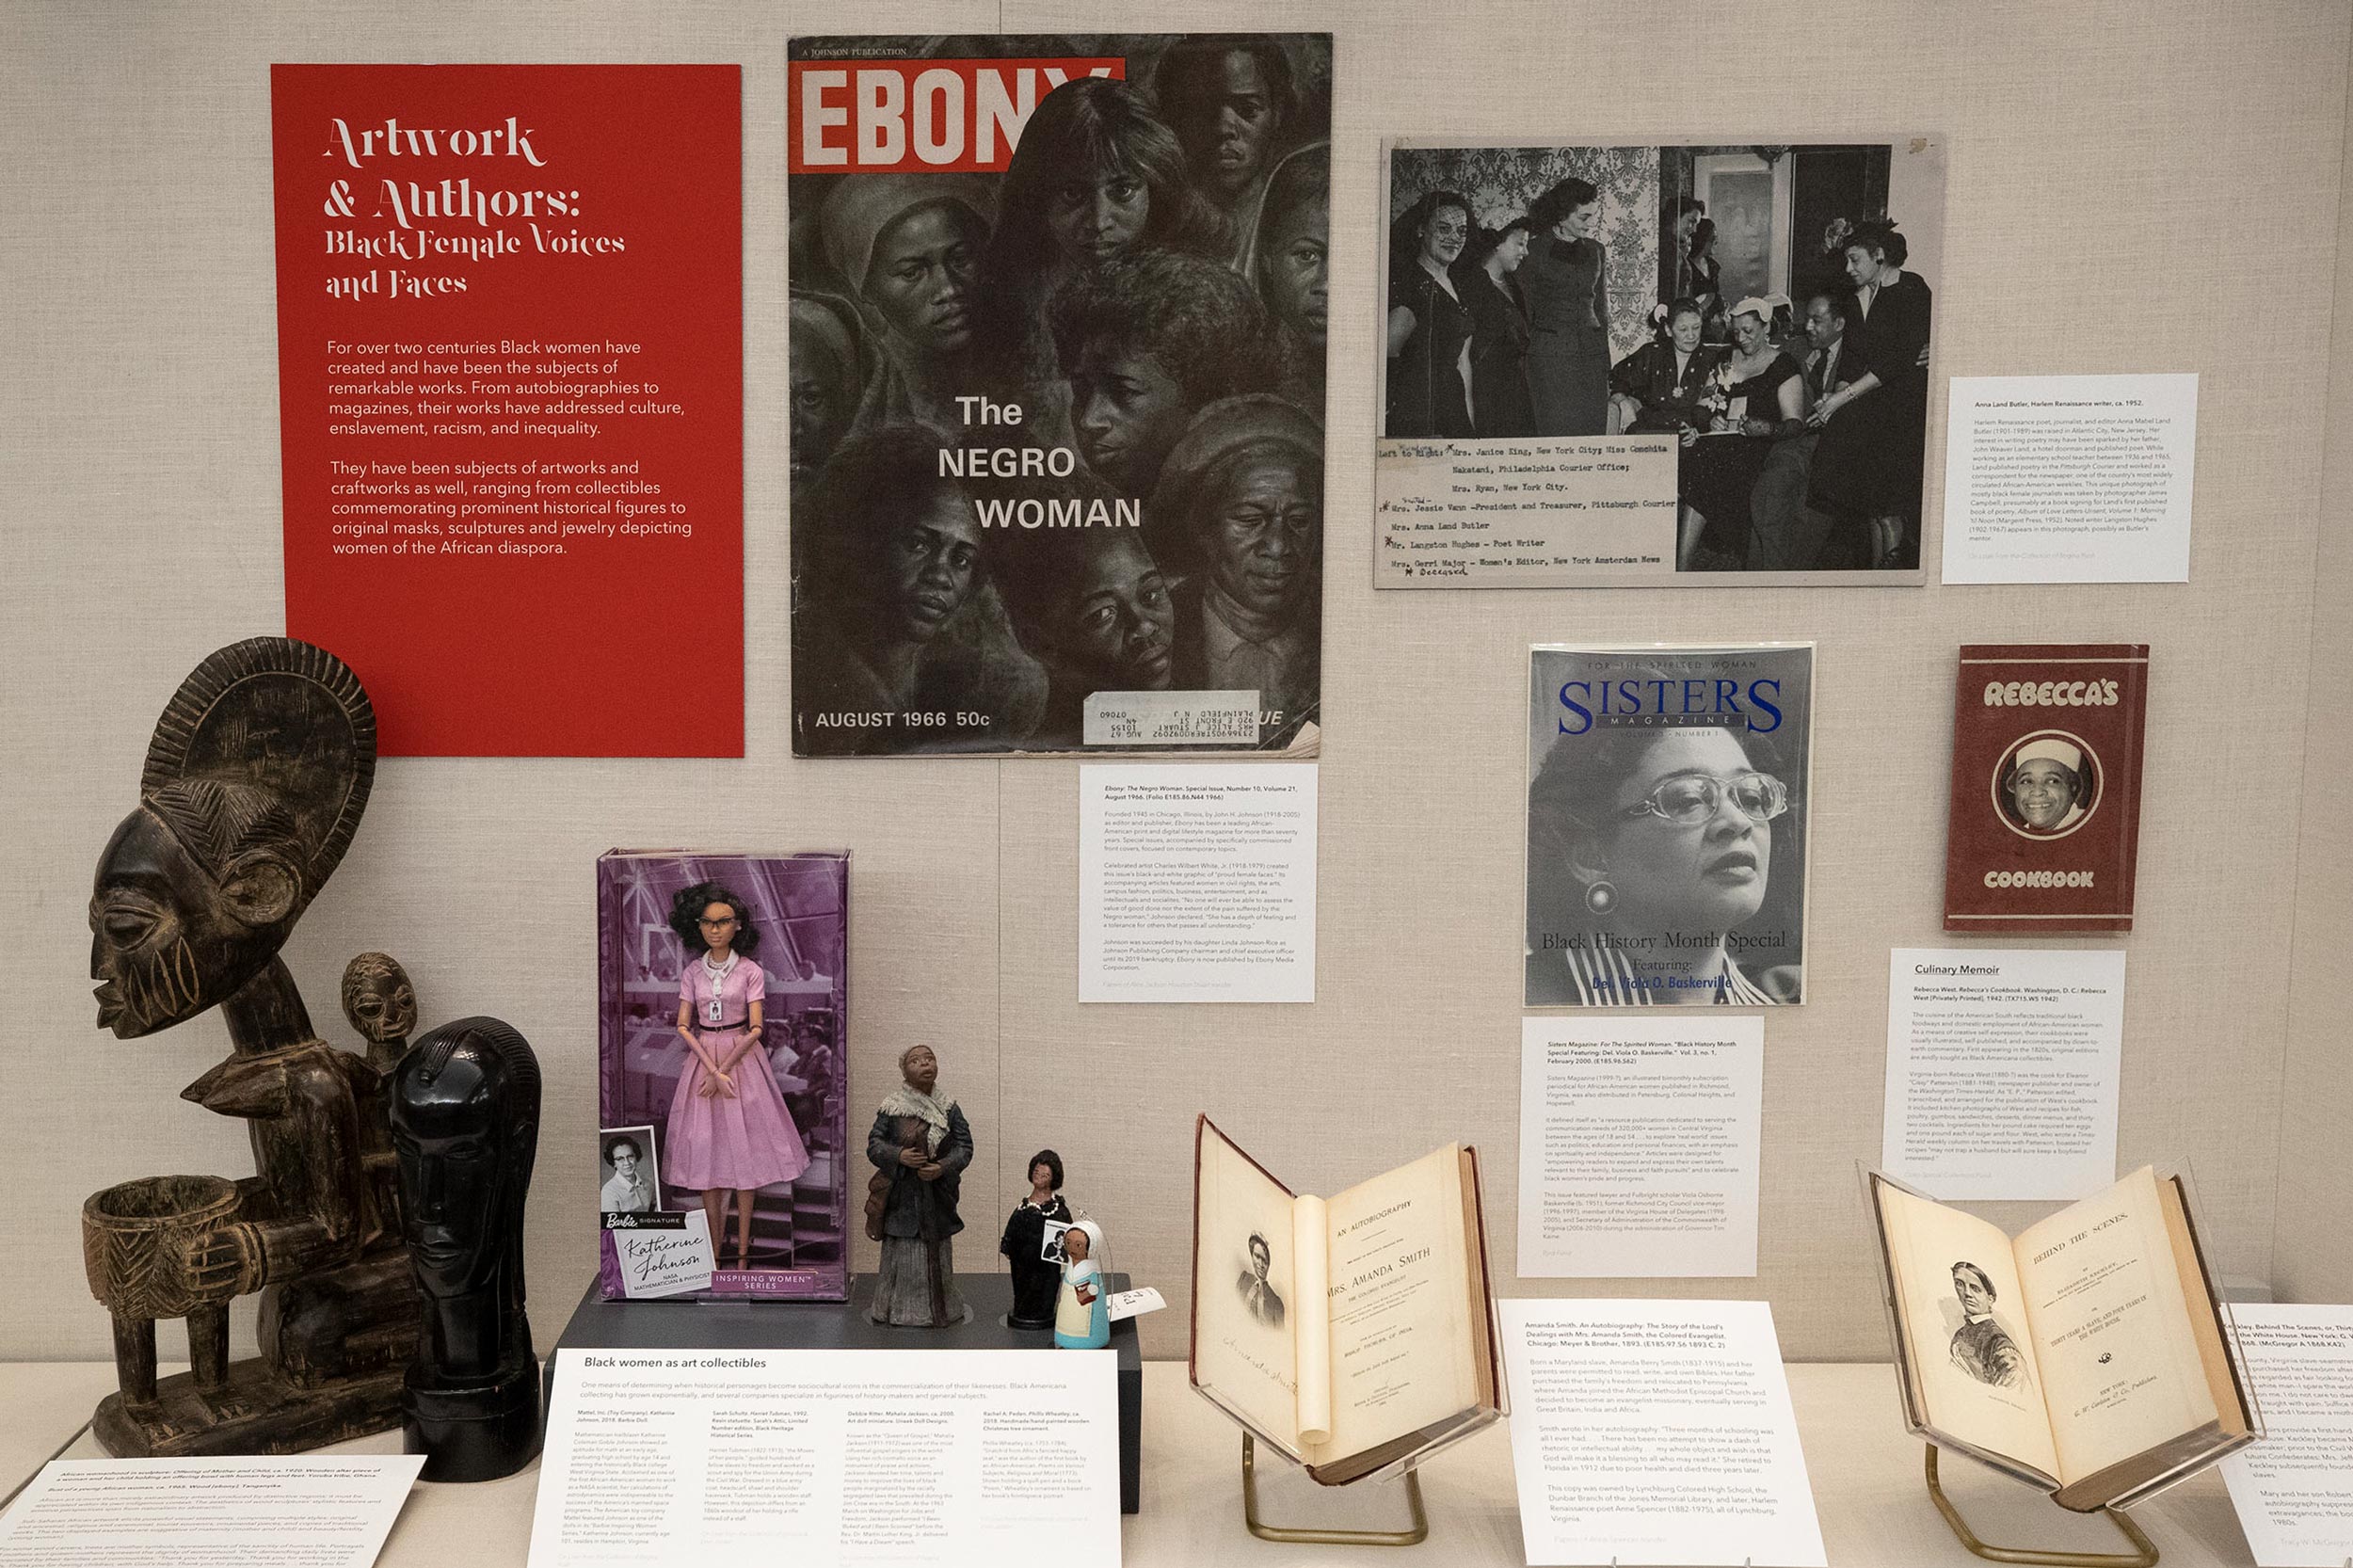 Among the images of black women, curators Ervin Jordan and Regina Rush loaned some of their own collectible items, from African sculptures to ornamental dolls.